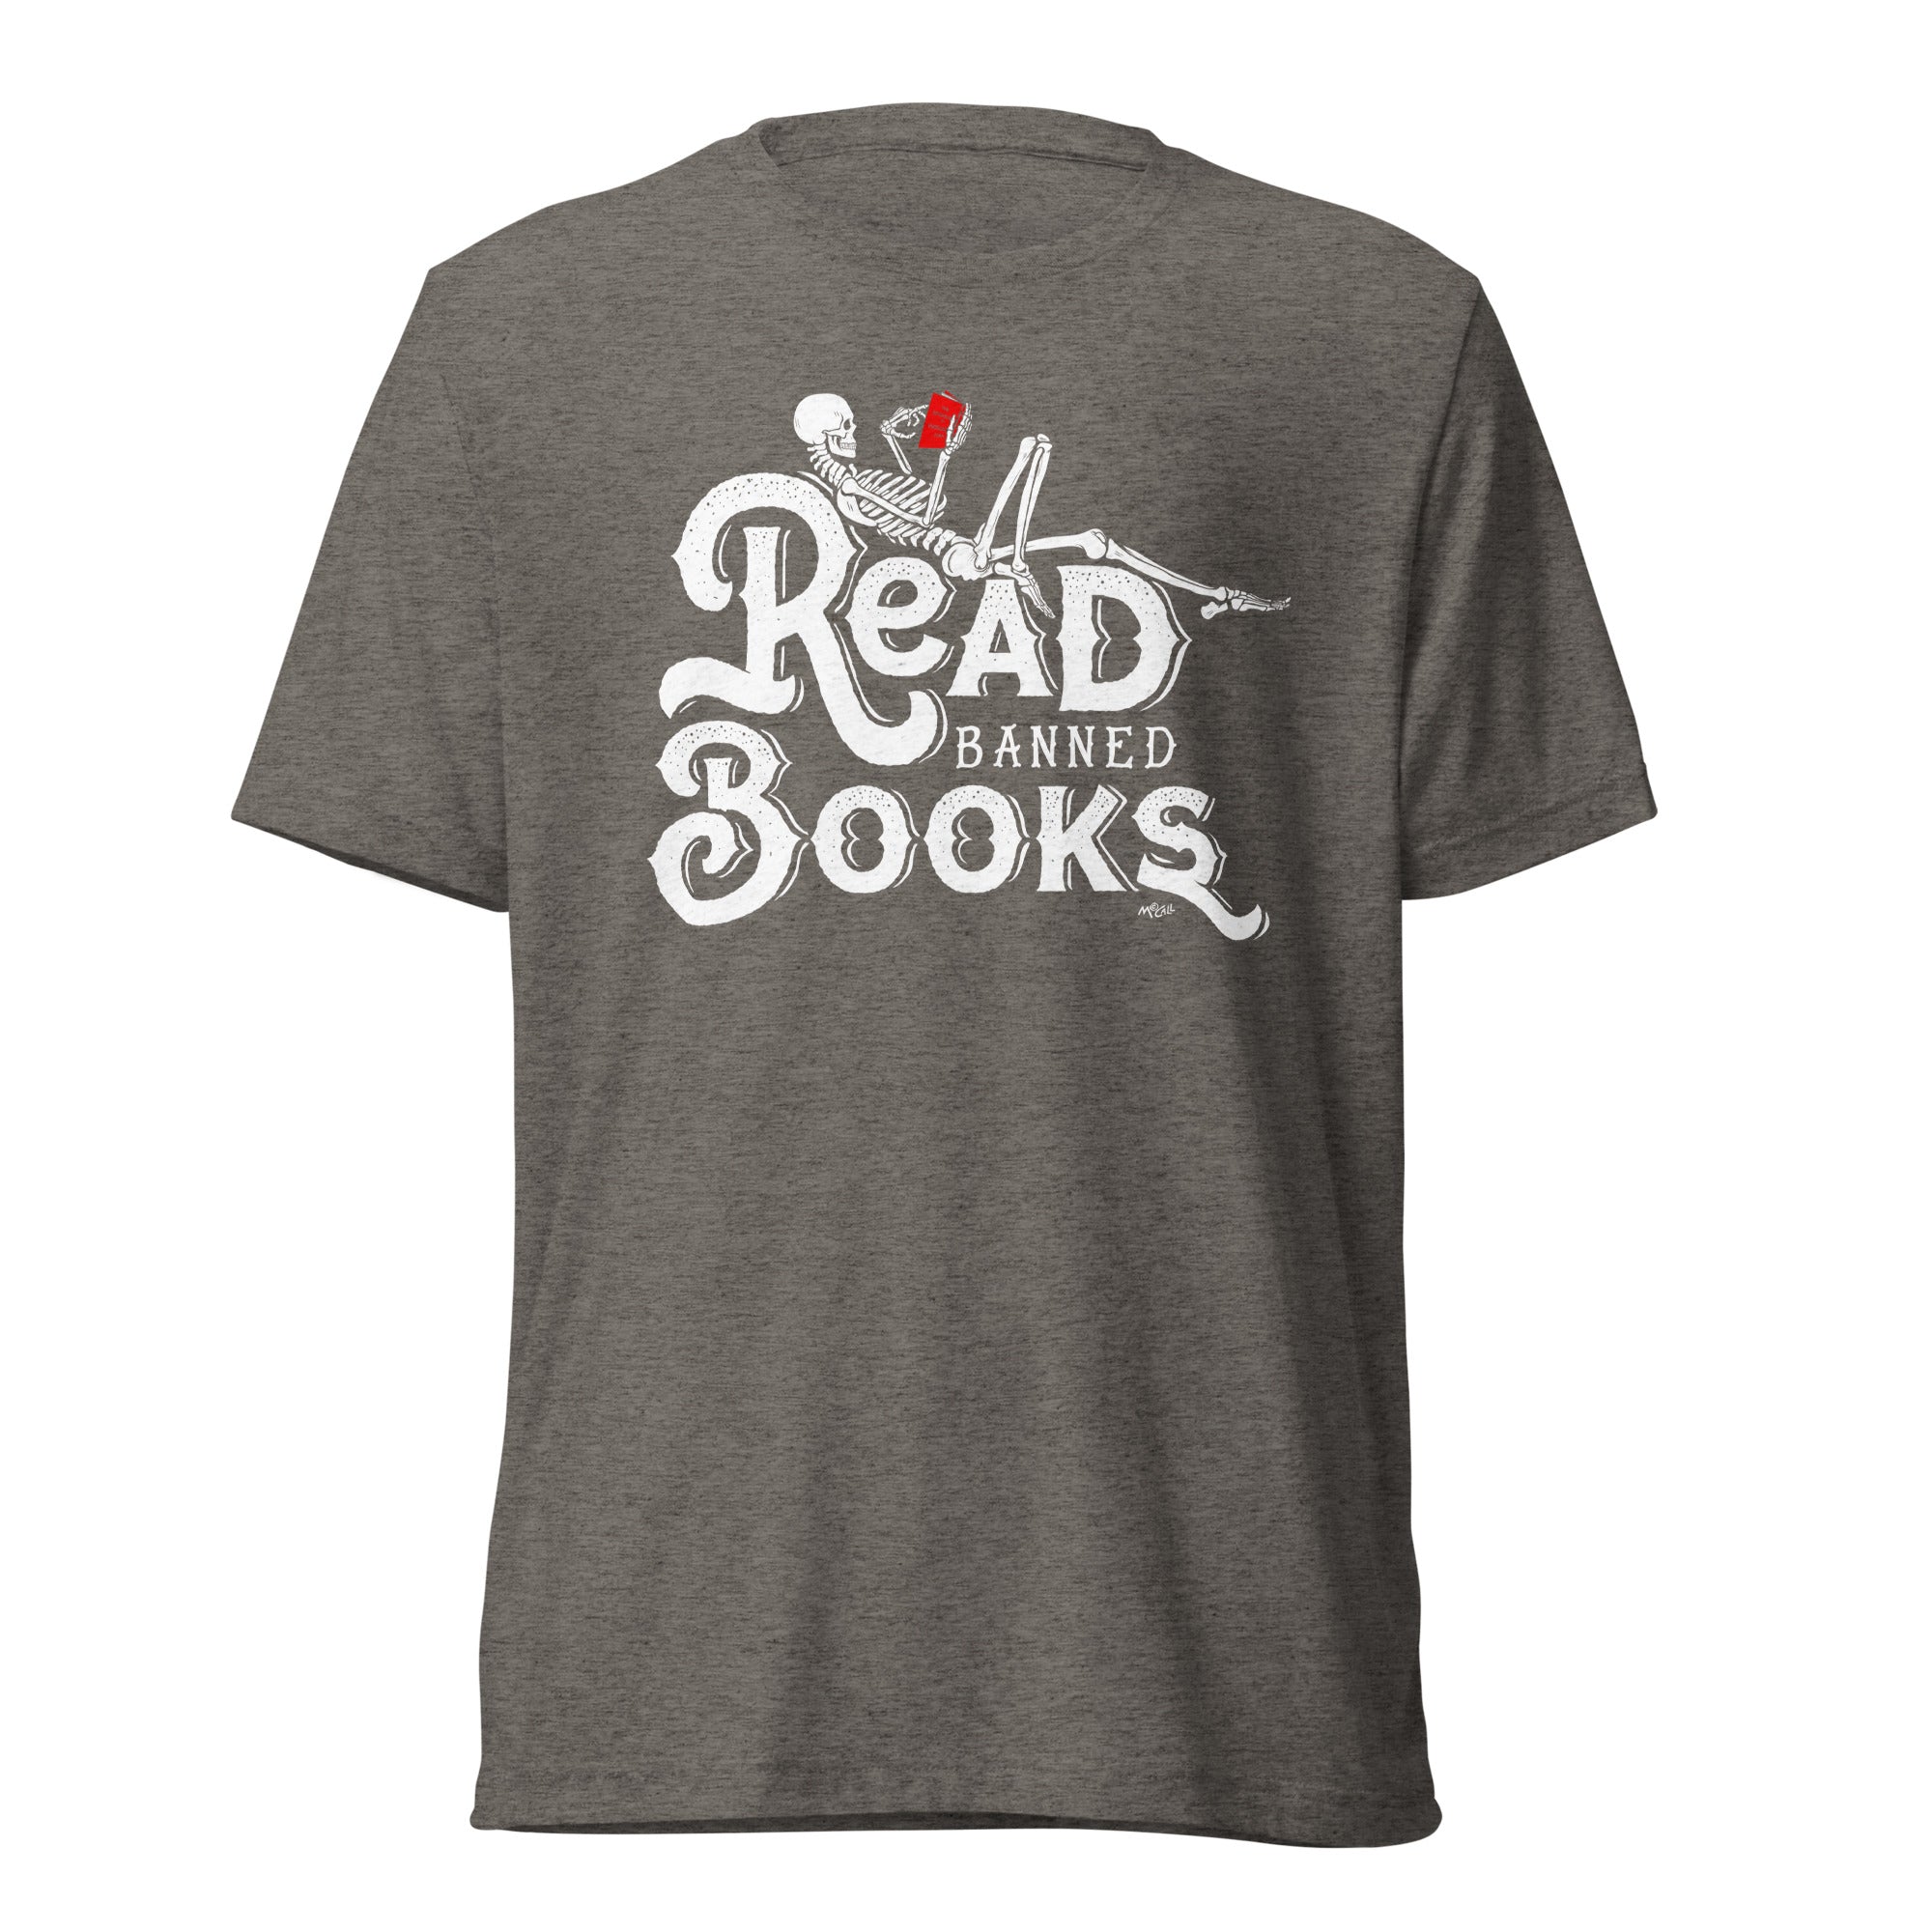 Read Banned Books Triblend Graphic T-Shirt